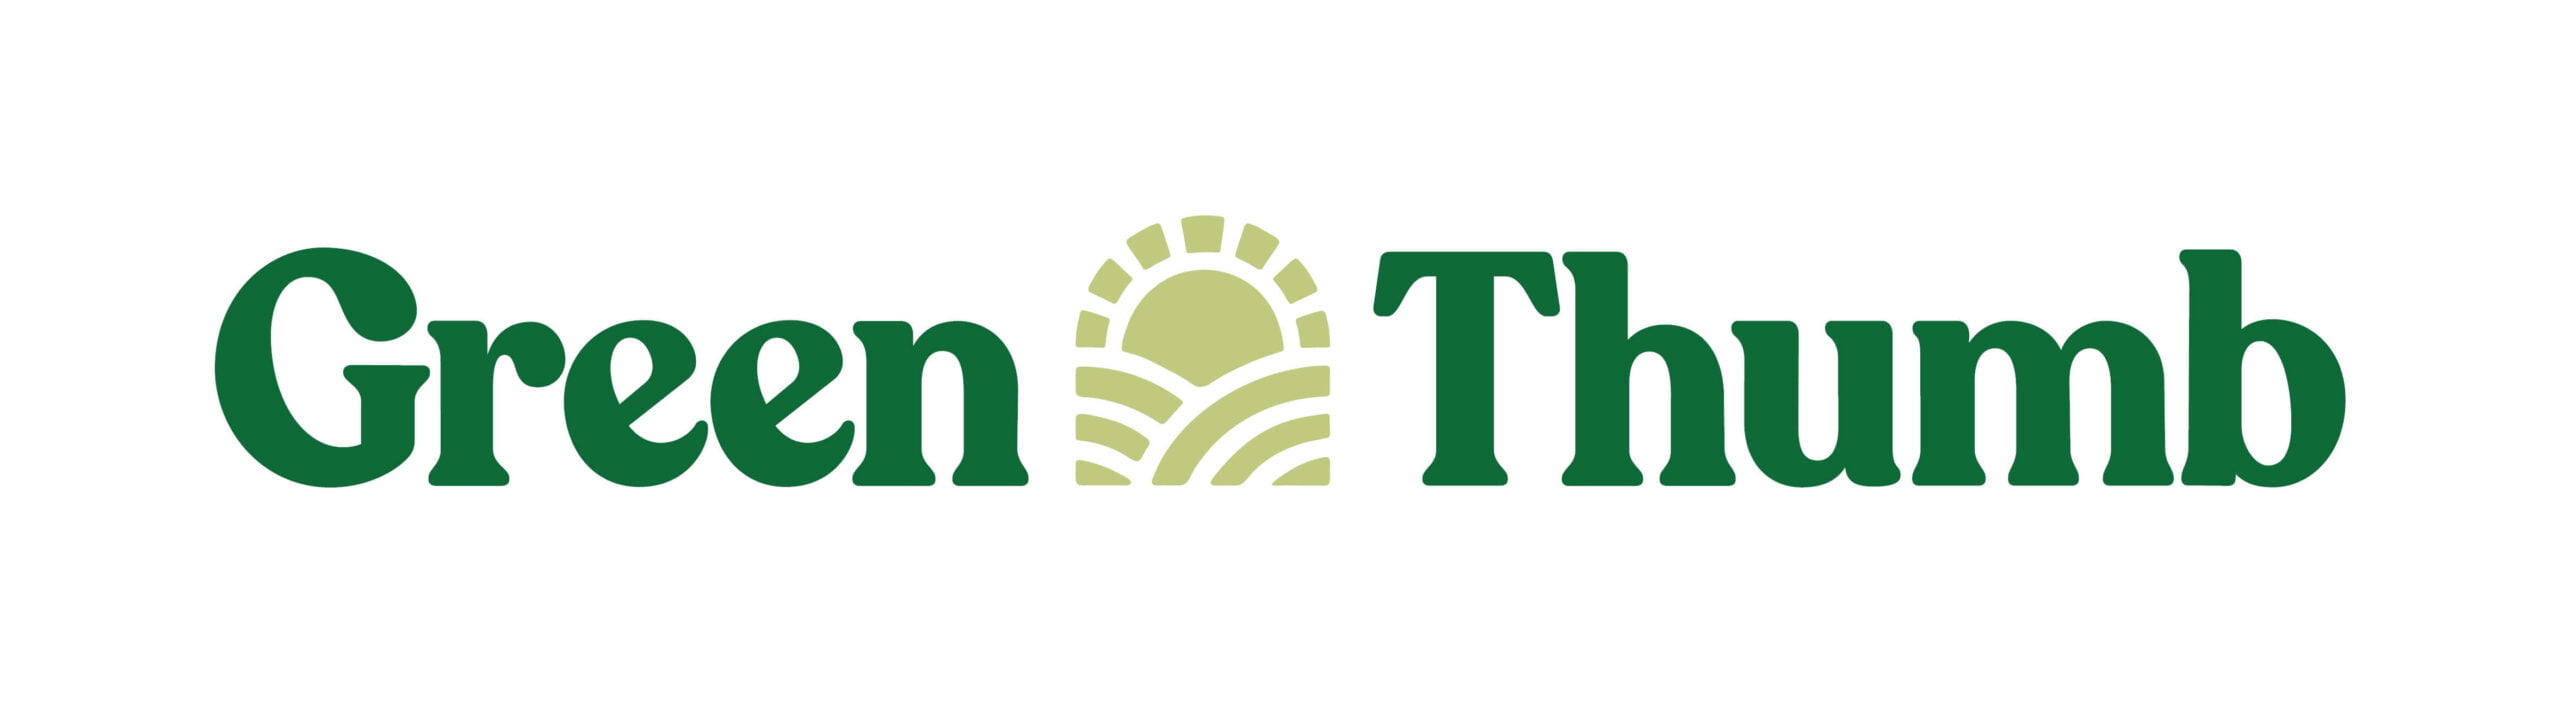 Green Thumb Industries appoint new independent board members